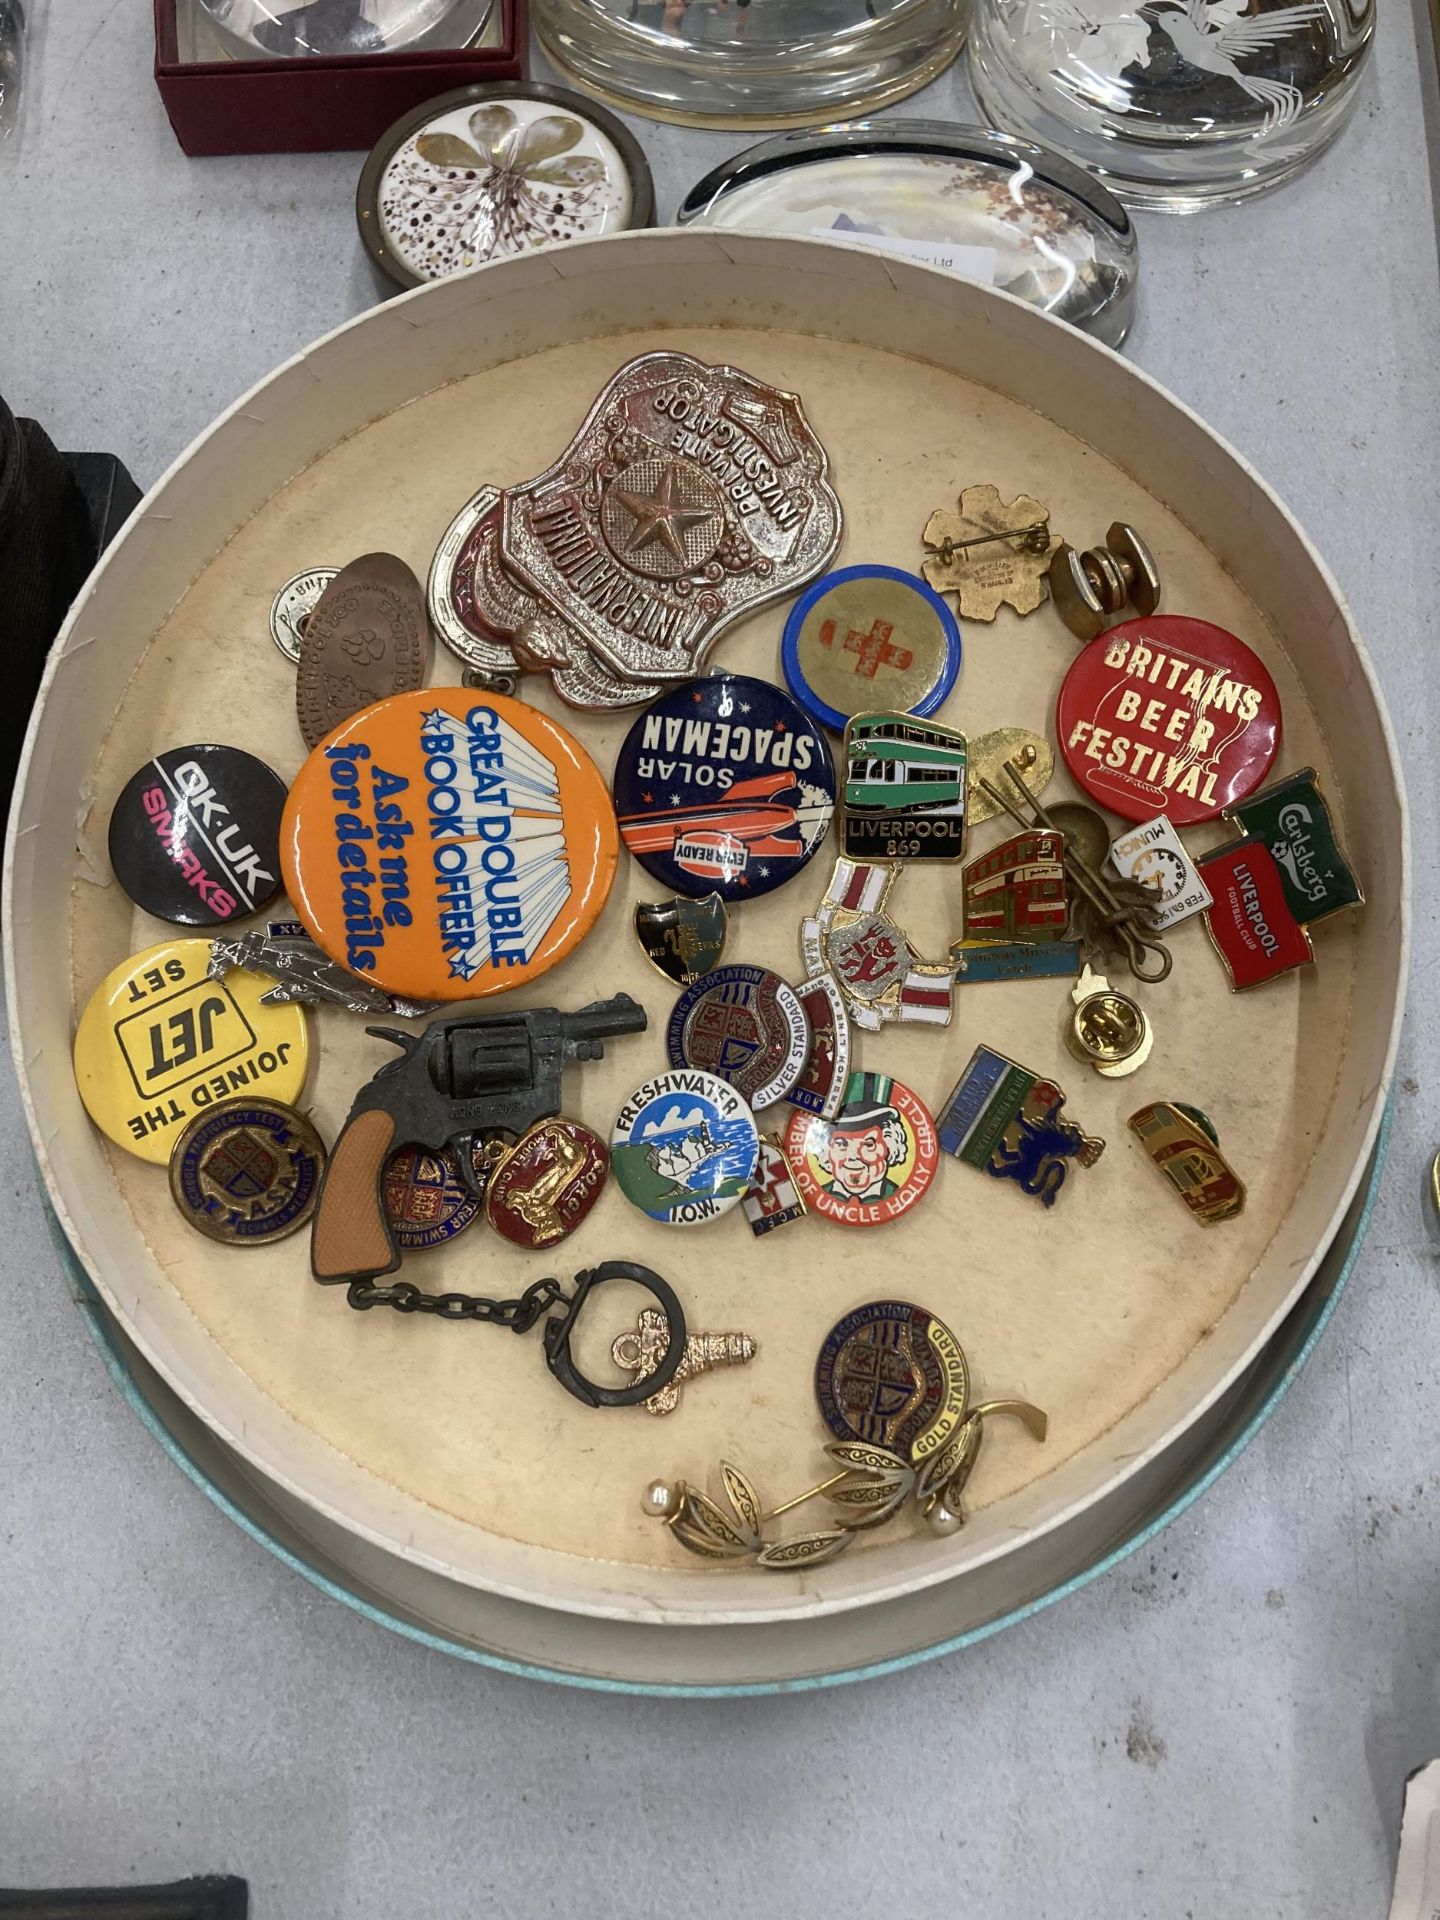 A QUANTITY OF BADGES IN A VINTAGE BARKER AND DOBSON CHOCOLATE BOX